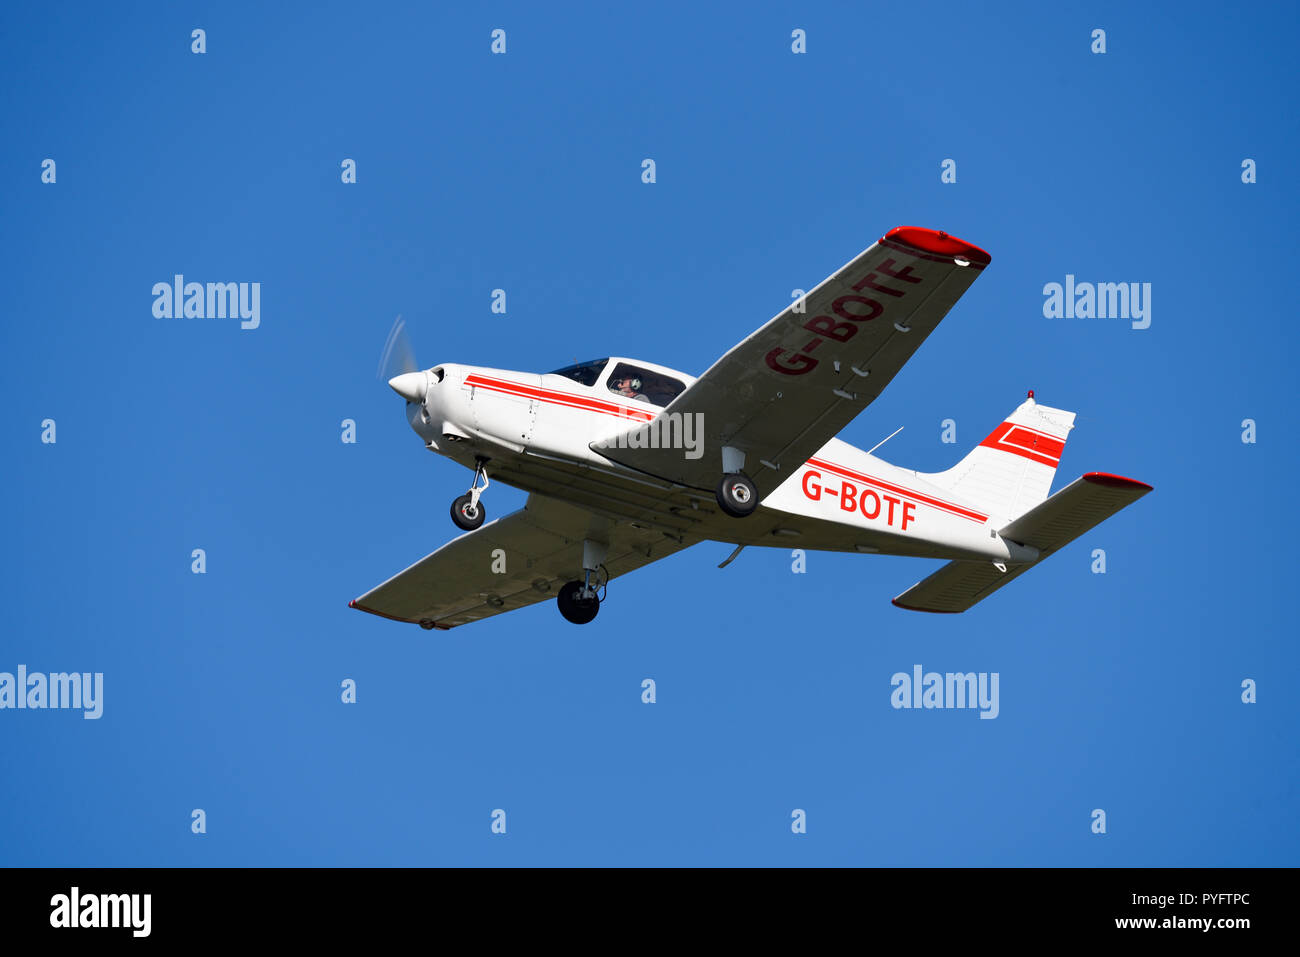 Piper PA-28 Cherokee Warrior light aircraft plane. General aviation airplane flying in clear blue sky. G-BOTF. Good visibility visual flight rules Stock Photo